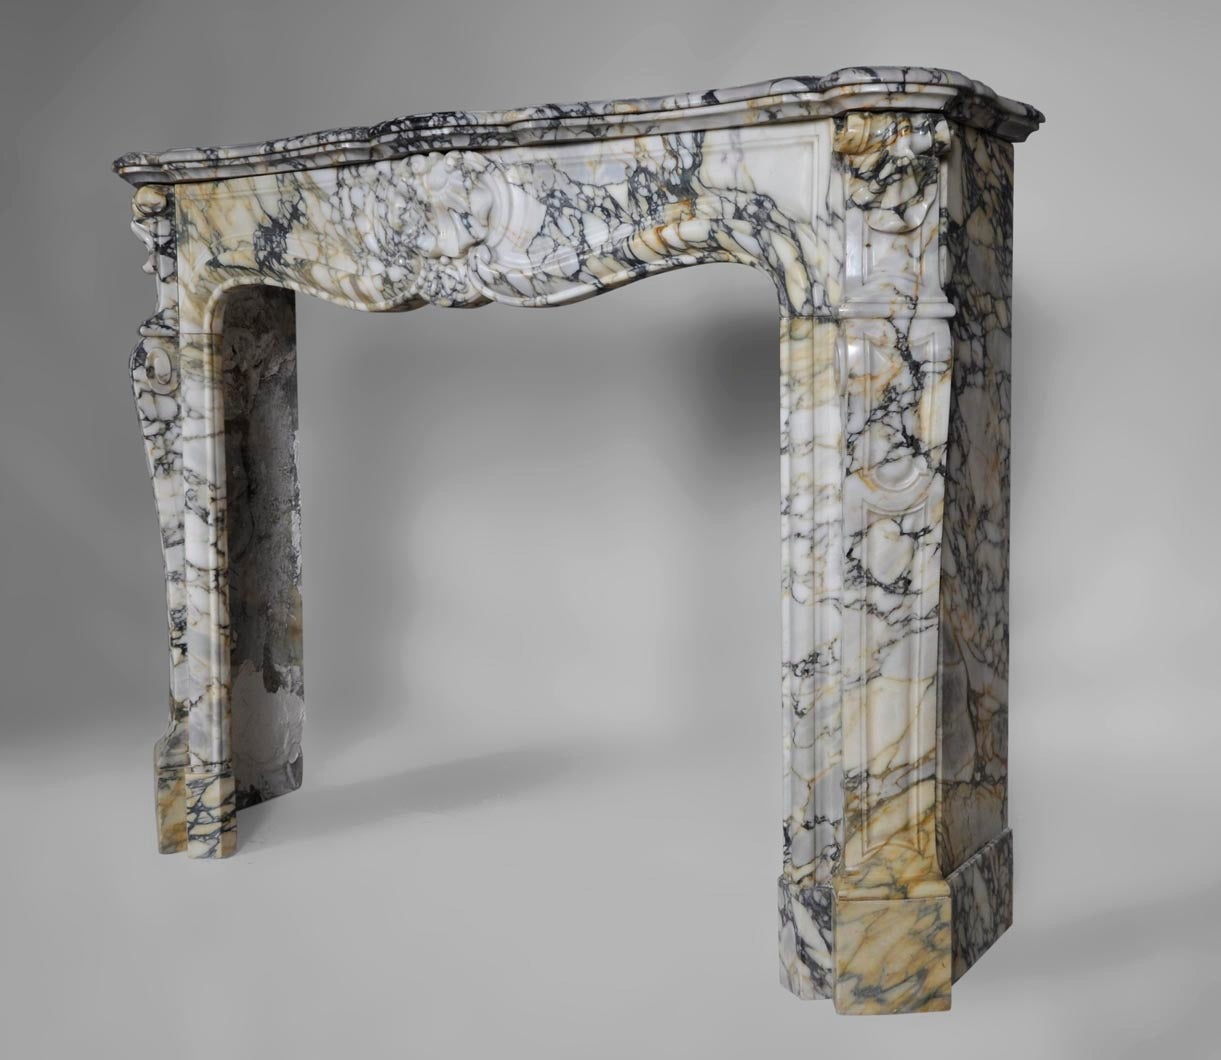 Breccia Marble Louis XV Style Fireplace Sculpted in Breche Marble, 19th Century Period